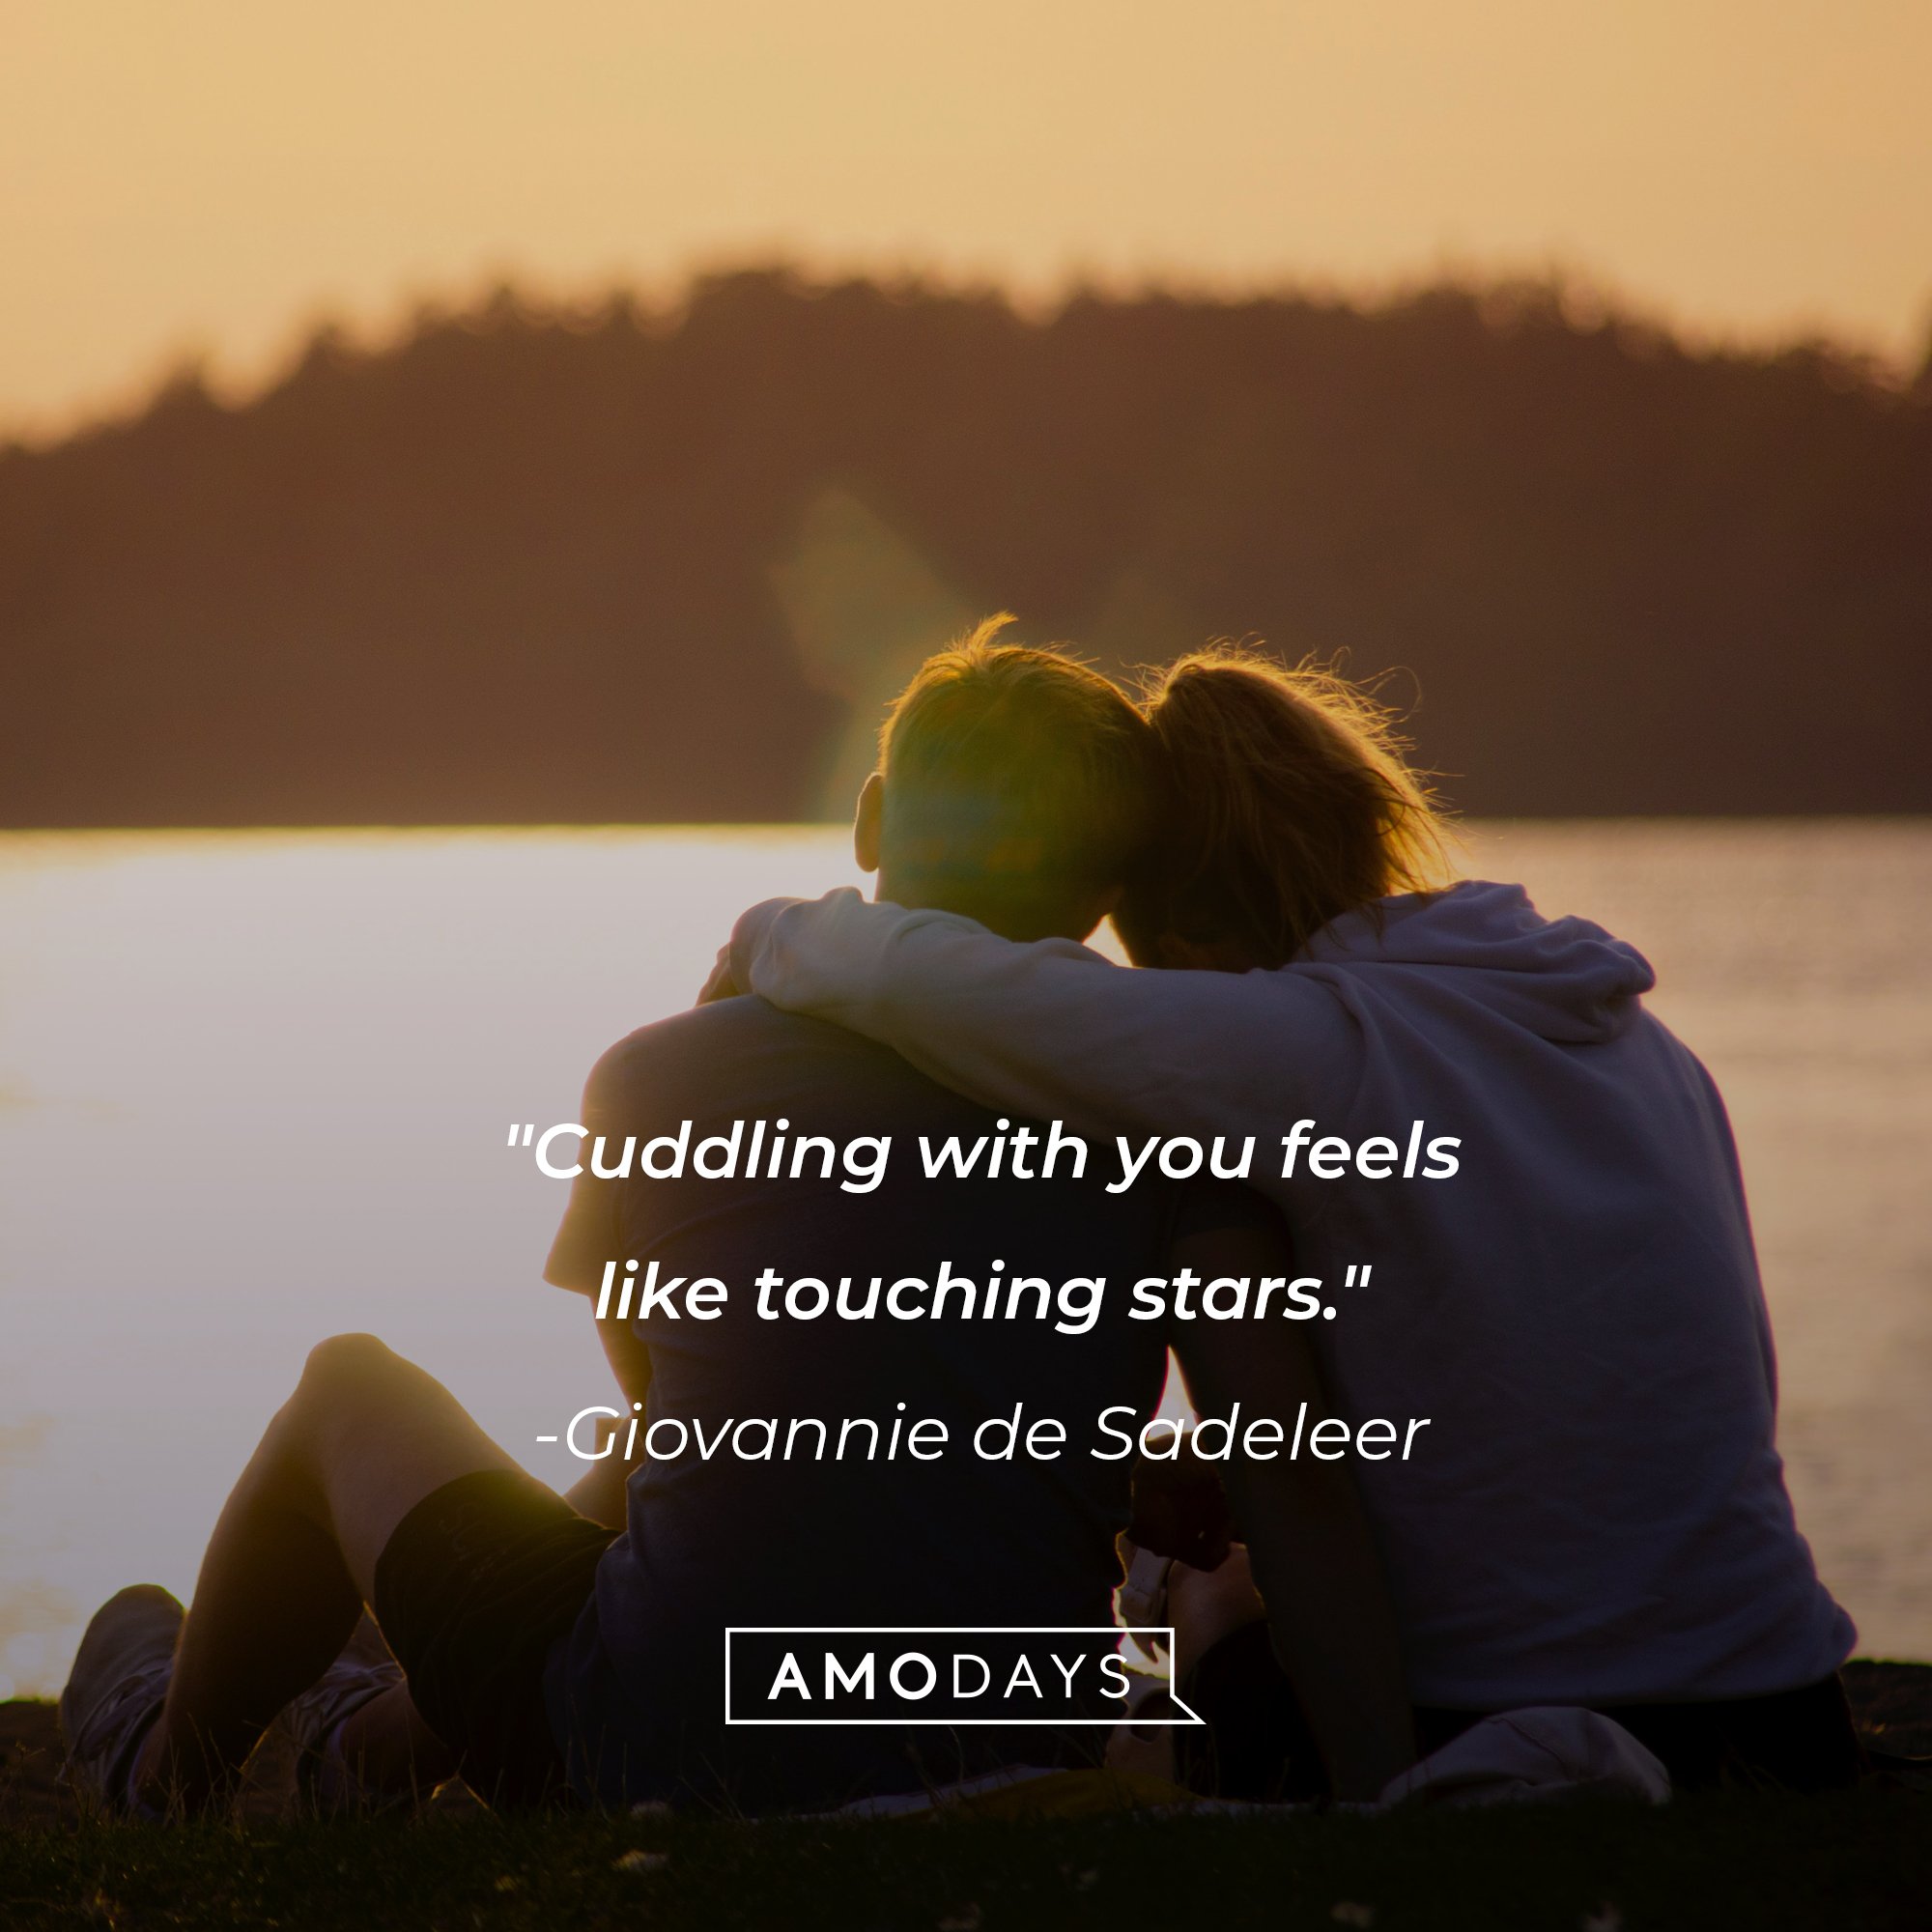 Giovannie de Sadeleer's quote: "Cuddling with you feels like touching stars." | Image: AmoDays